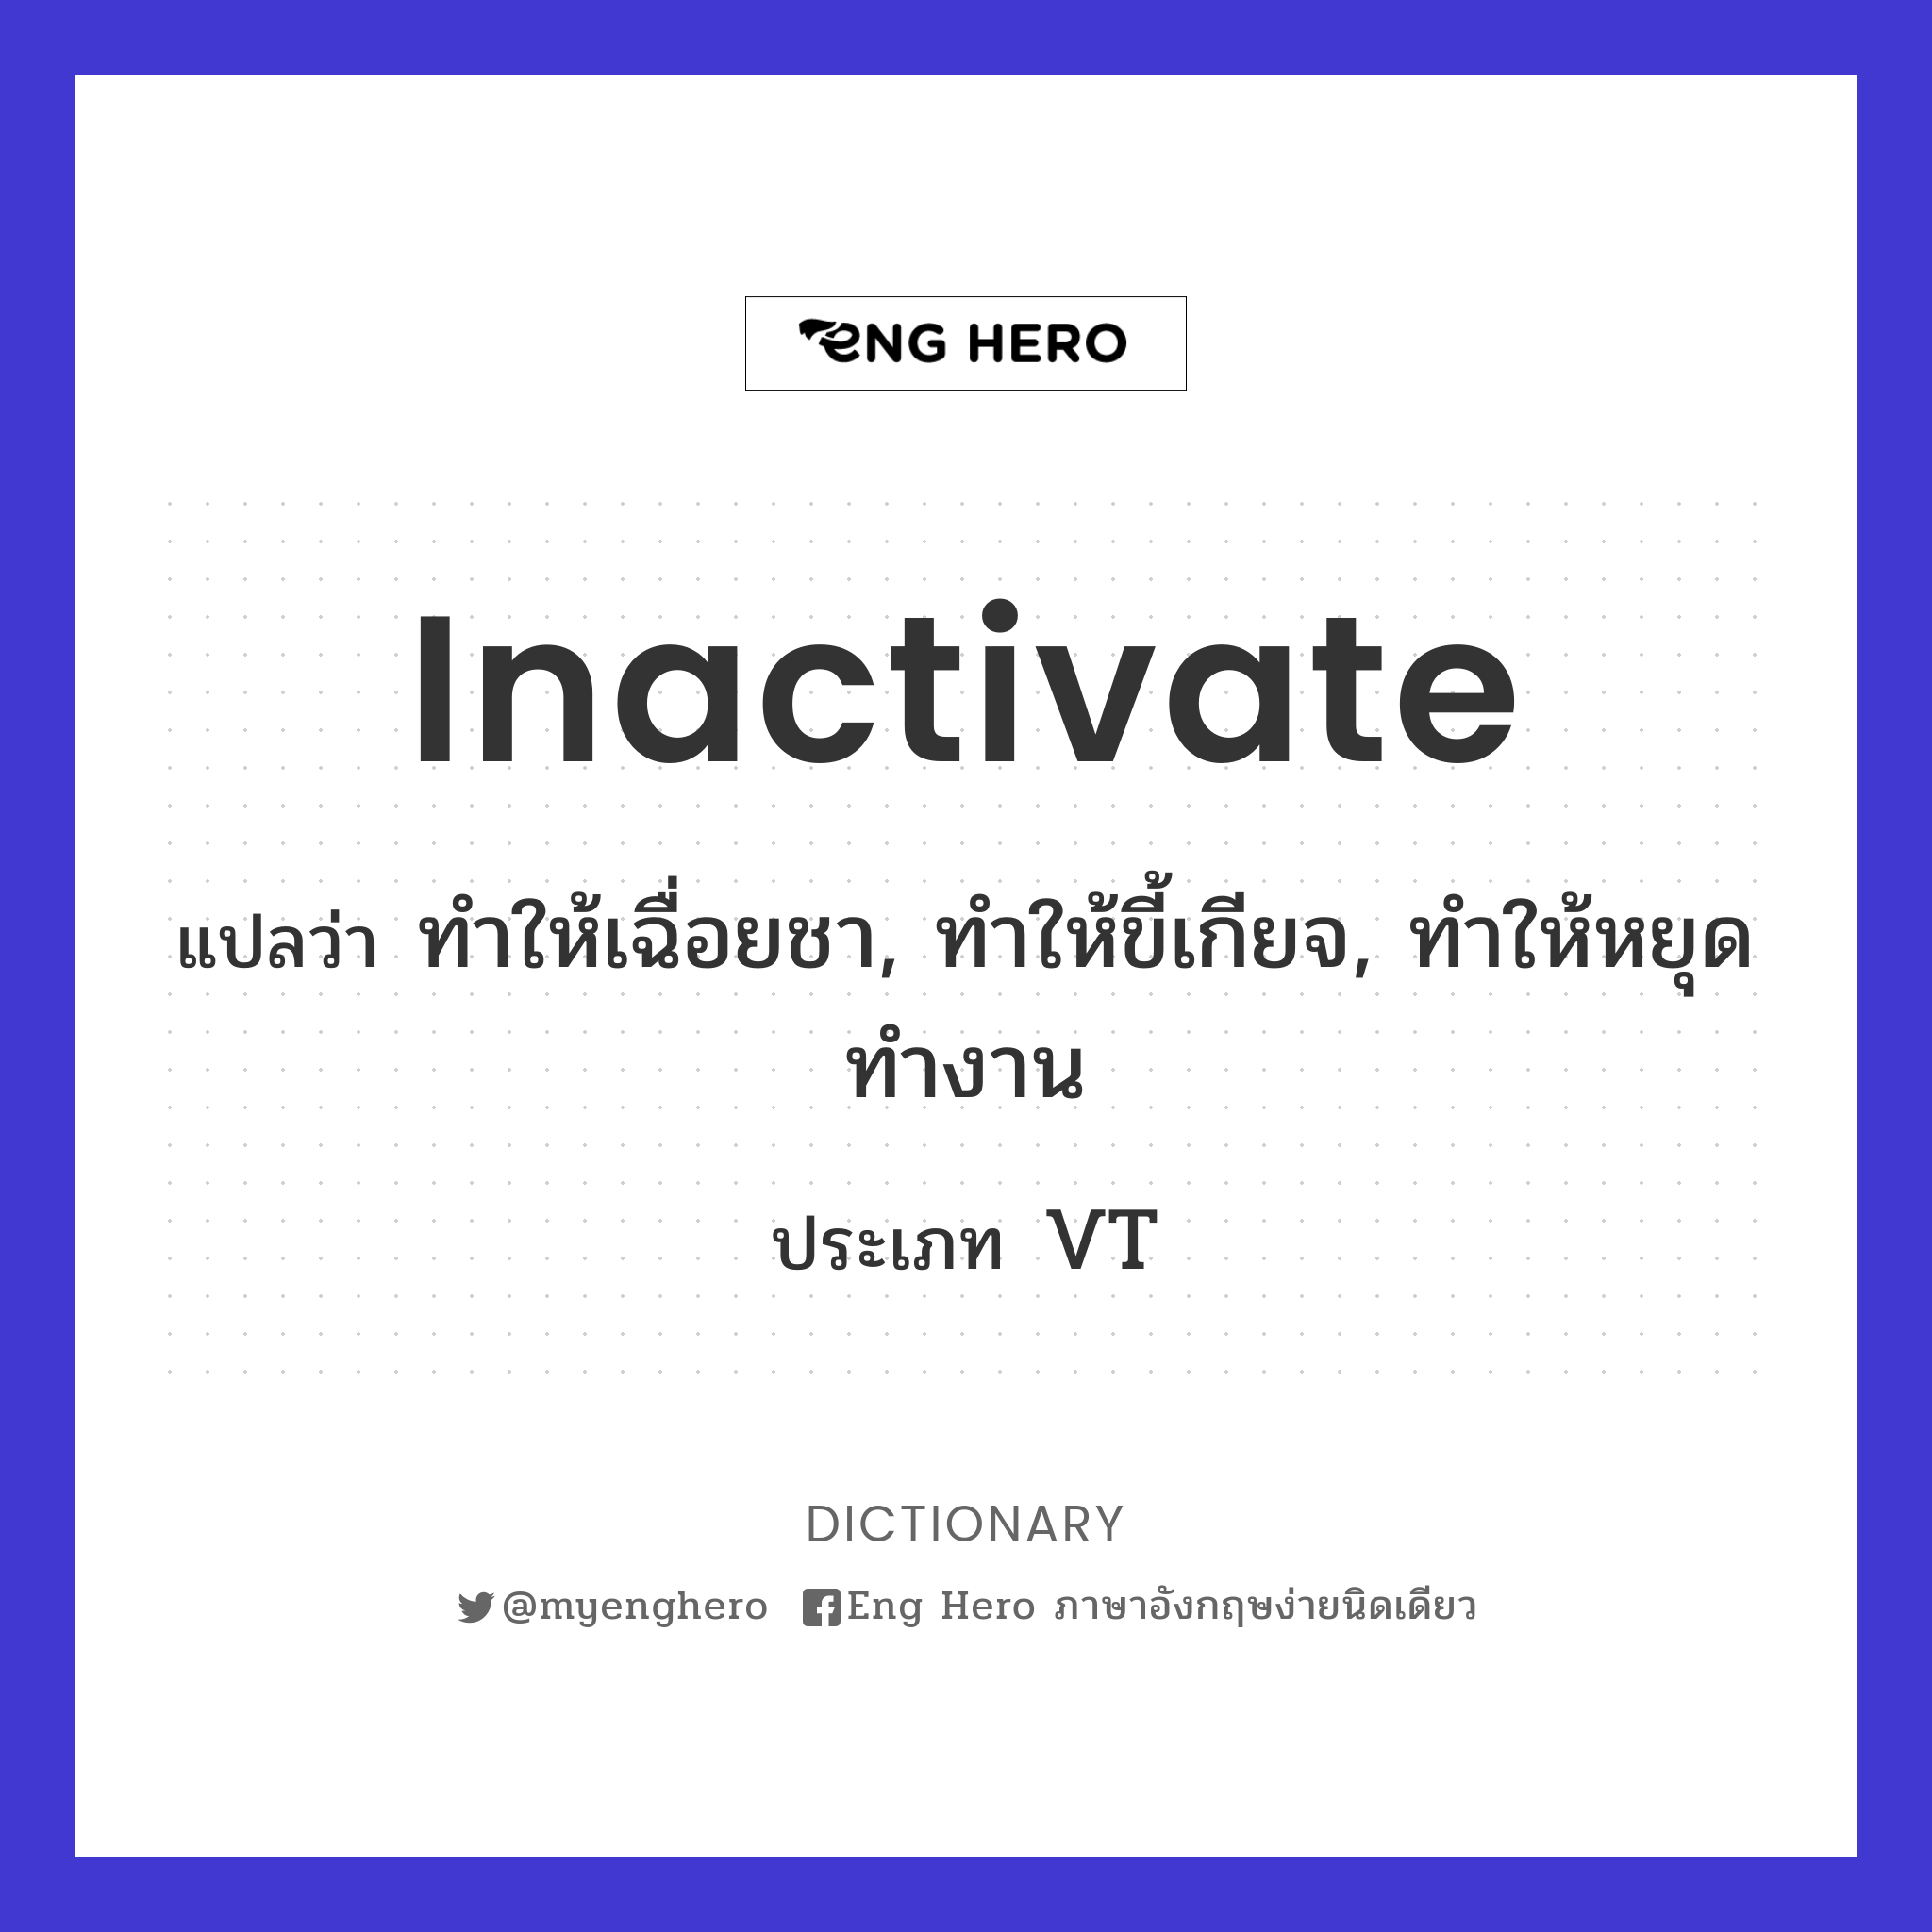 inactivate